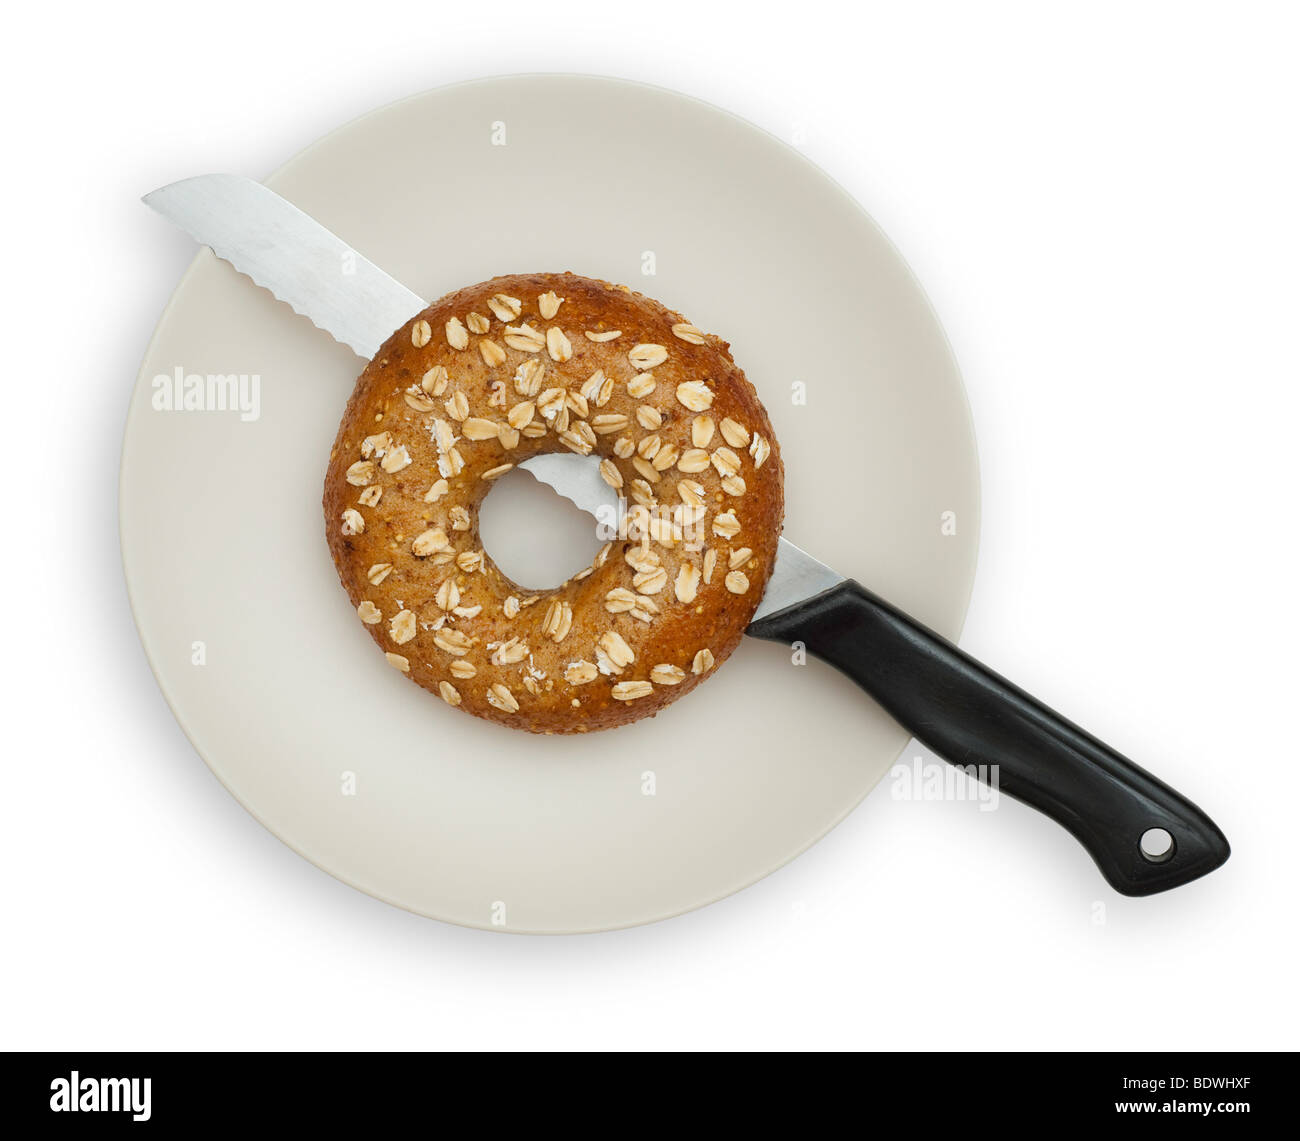 One Whole Grain Bagel on a White plate, isolated on white background. The Bagel is half cut with a knife. Stock Photo